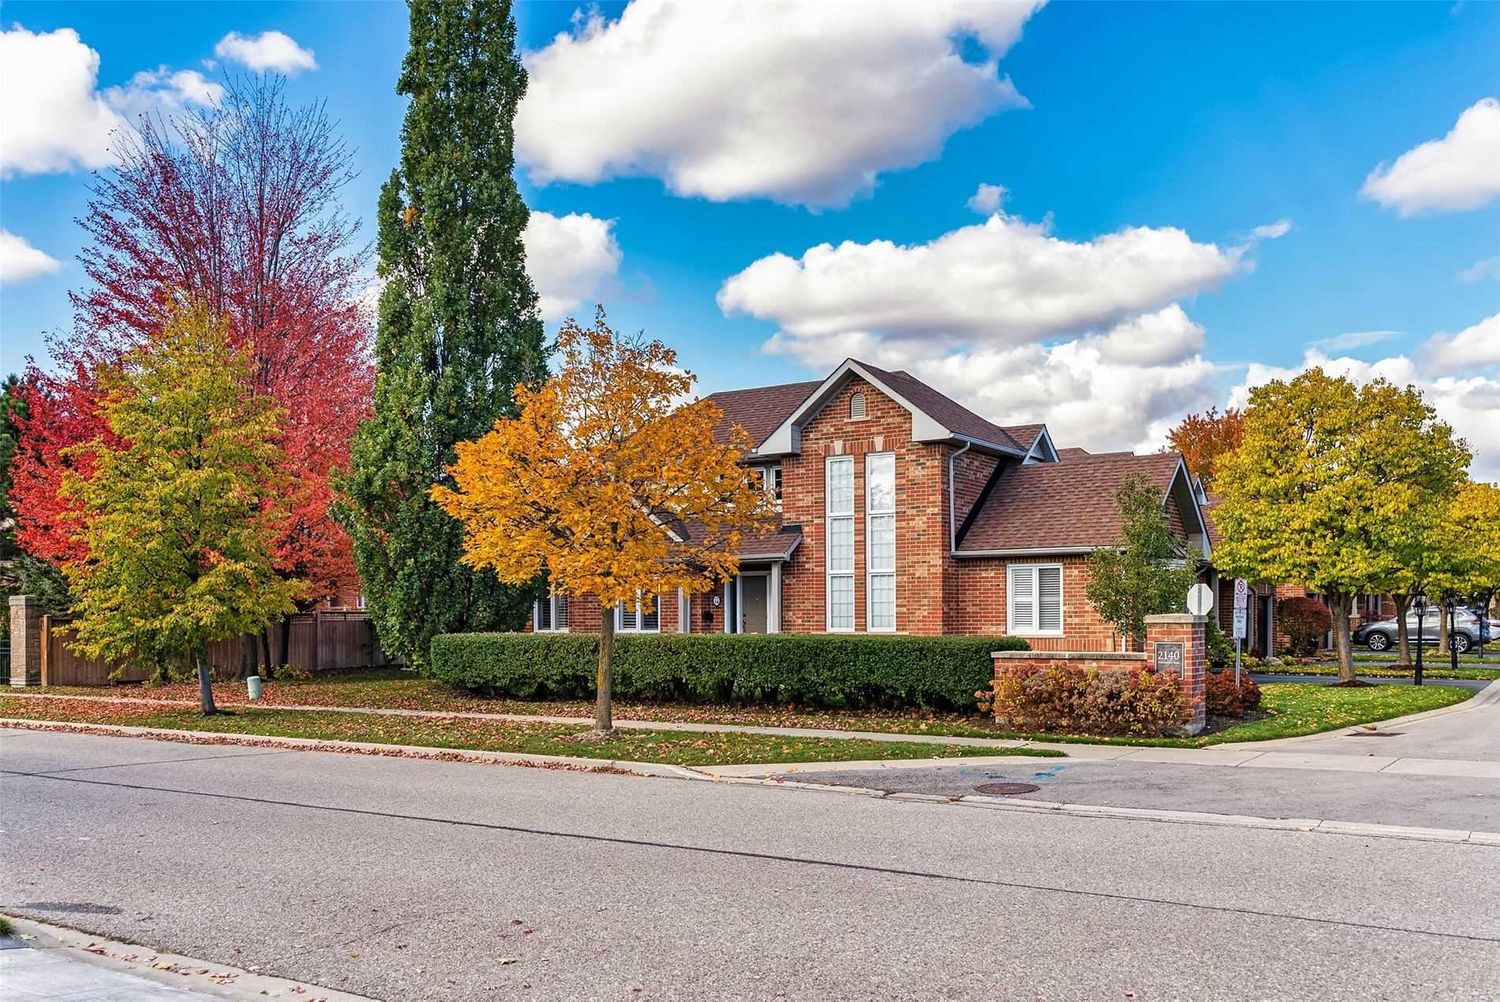 2140 Turnberry Road. Millcroft Gardens II Townhomes is located in  Burlington, Toronto - image #1 of 2